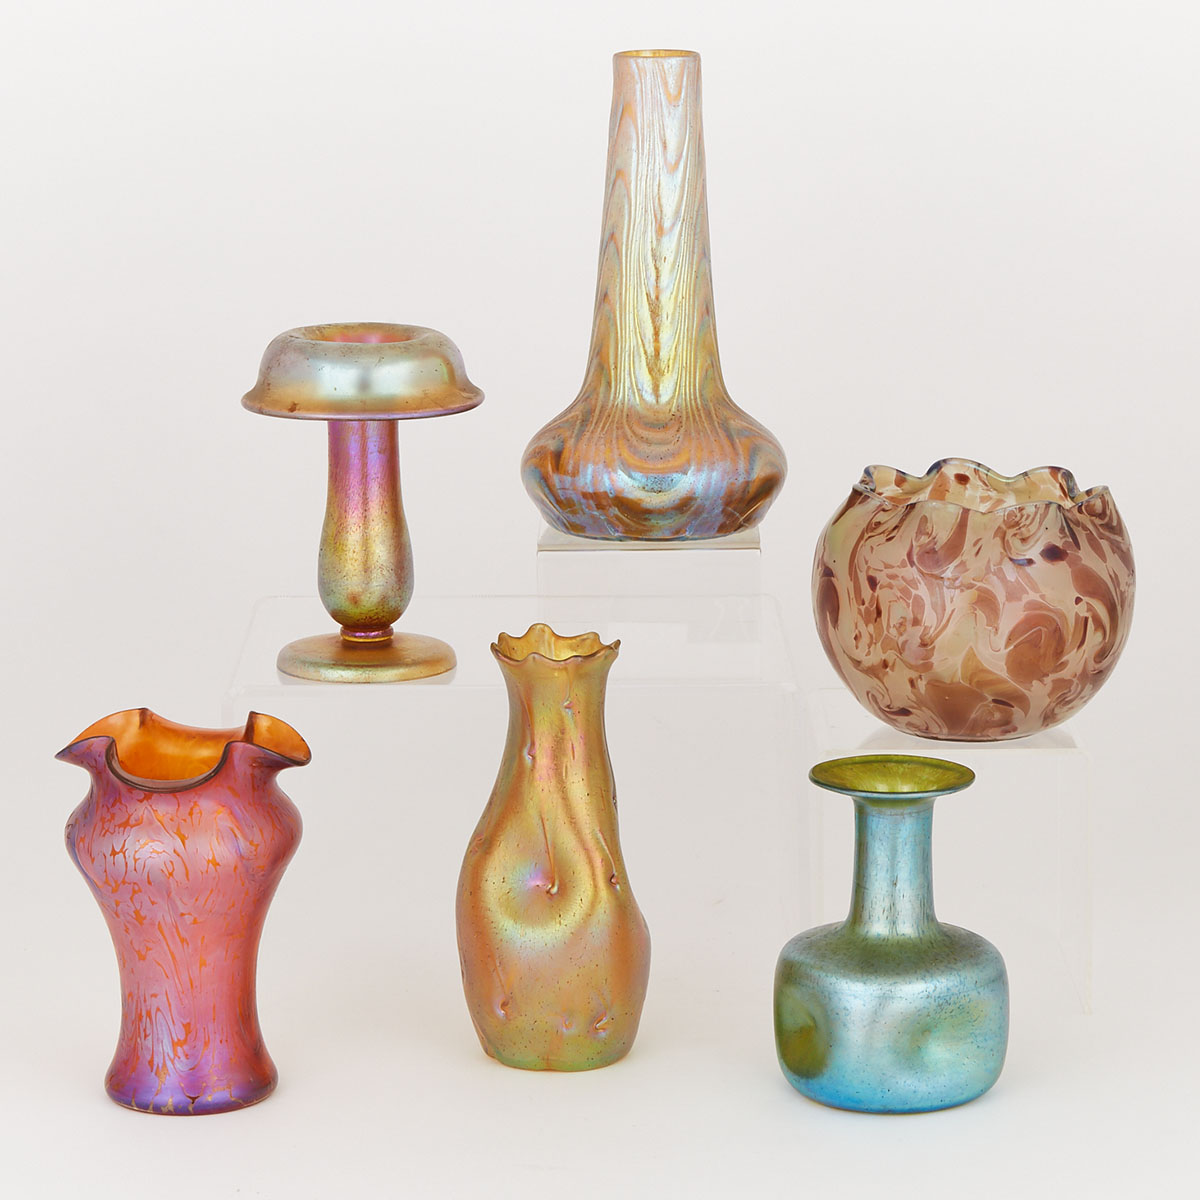 Six Bohemian Iridescent Coloured Glass Vases, early 20th century